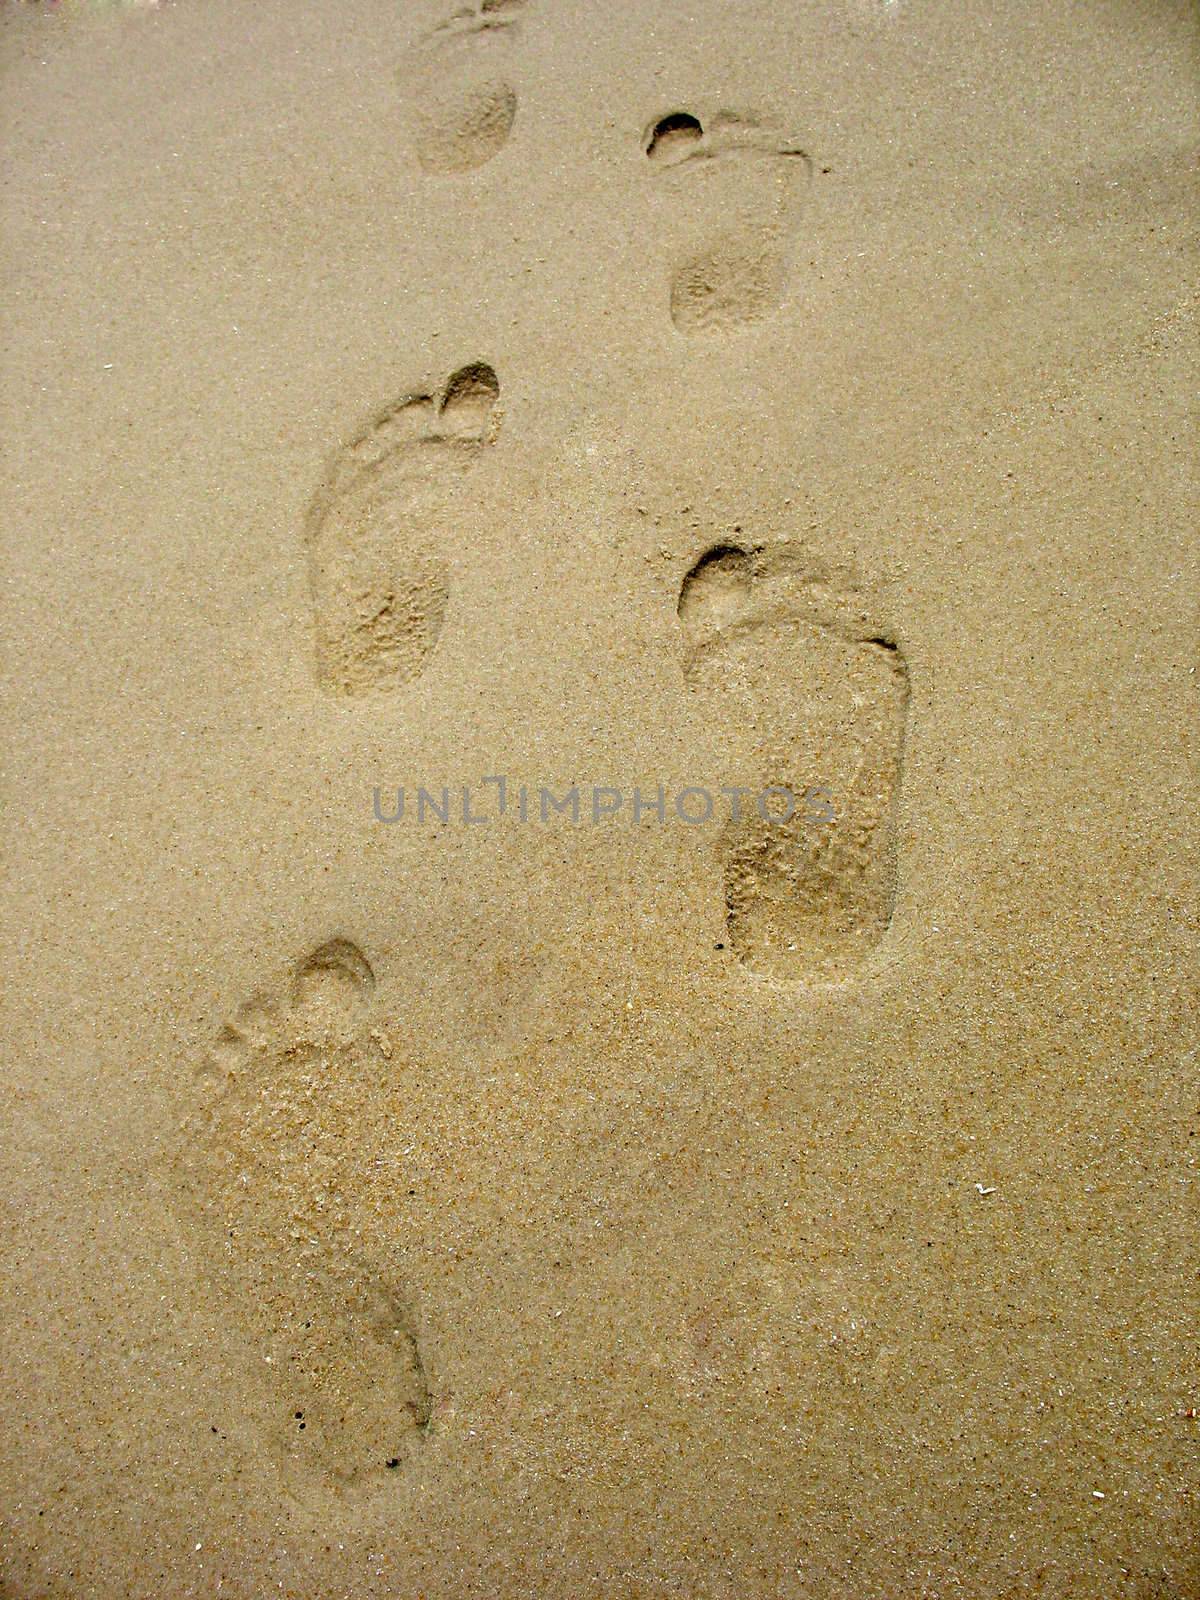 footprints in sand by graficallyminded